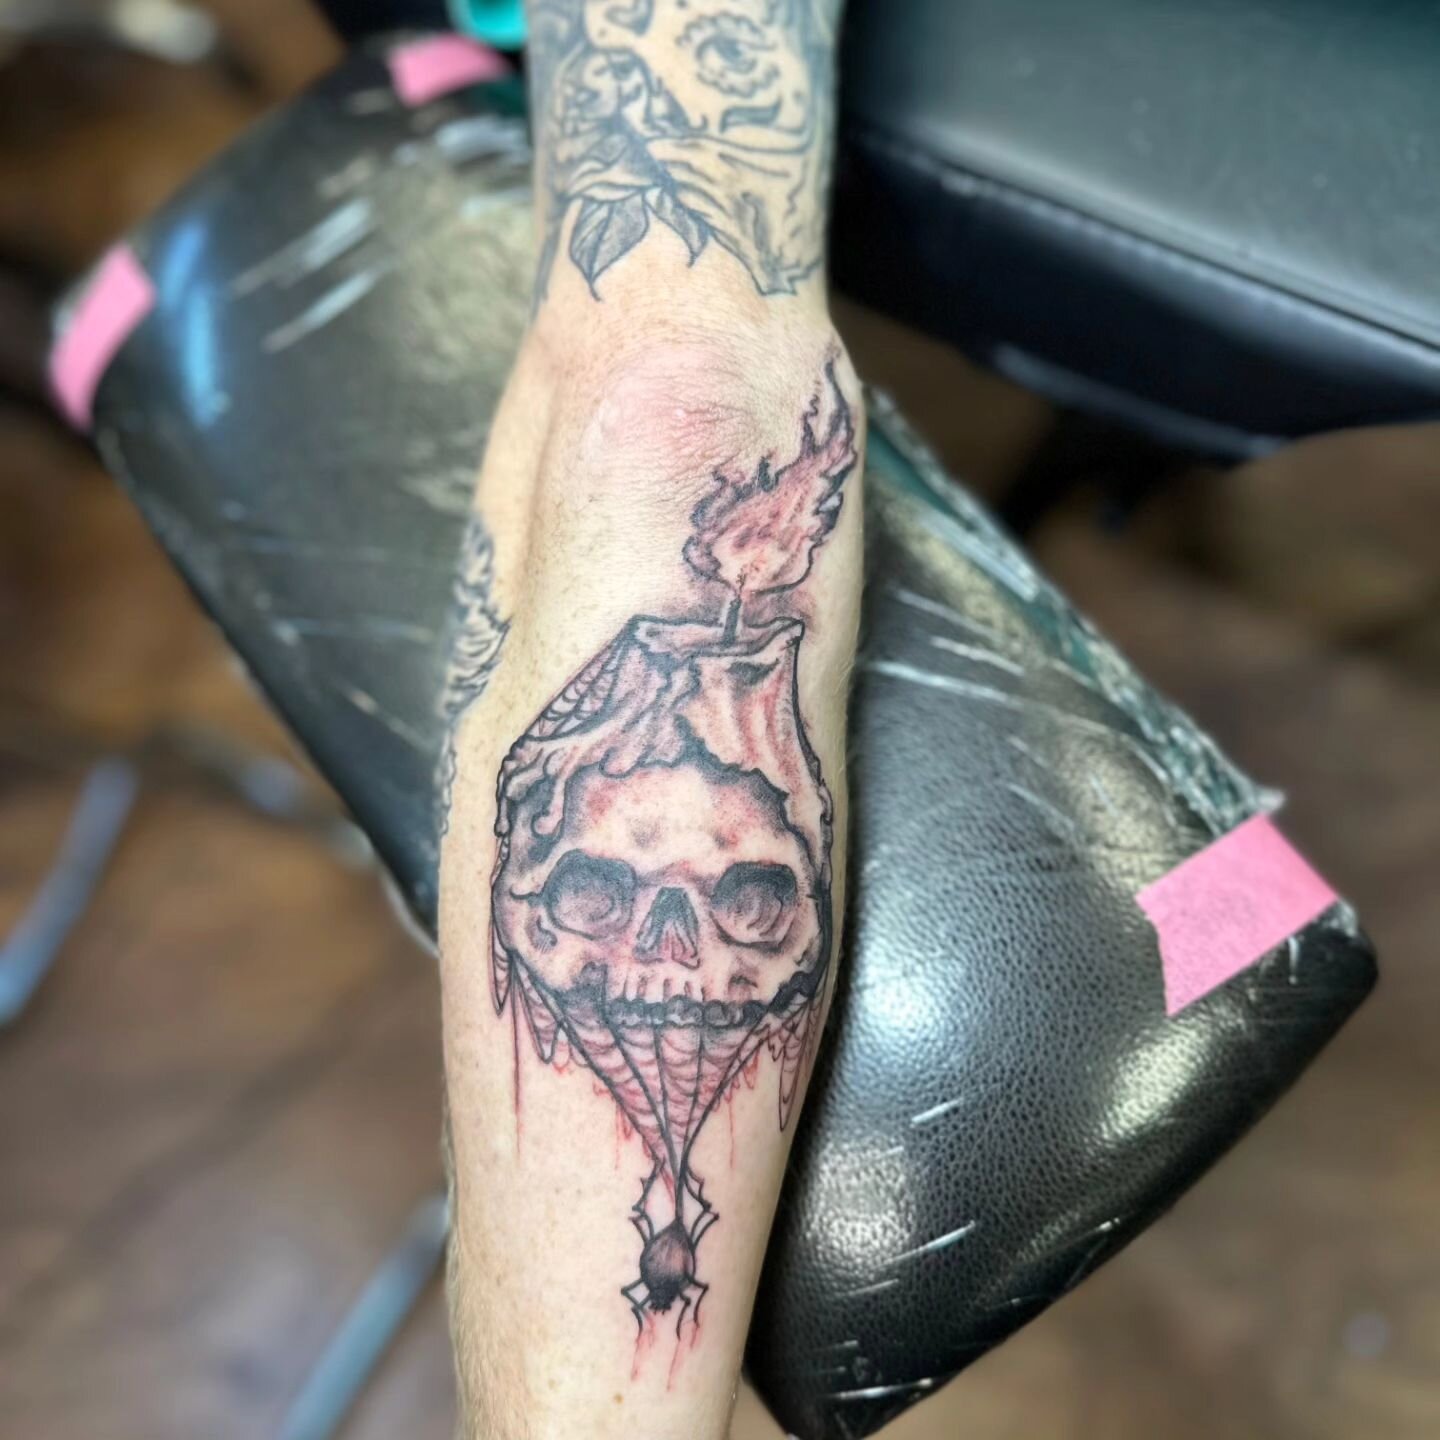 Really digging this spooky skull candle with a spider web for Matt, I want to see the rest of the spooky mantle now 🤩.
.
Follow @rogue_tattoopgh
.

.
.
.
.
.
.
.
.

#412 #tattooflash #pittsburghartist #tattooart #tattooer #pittsburghtattoo #tattoo #